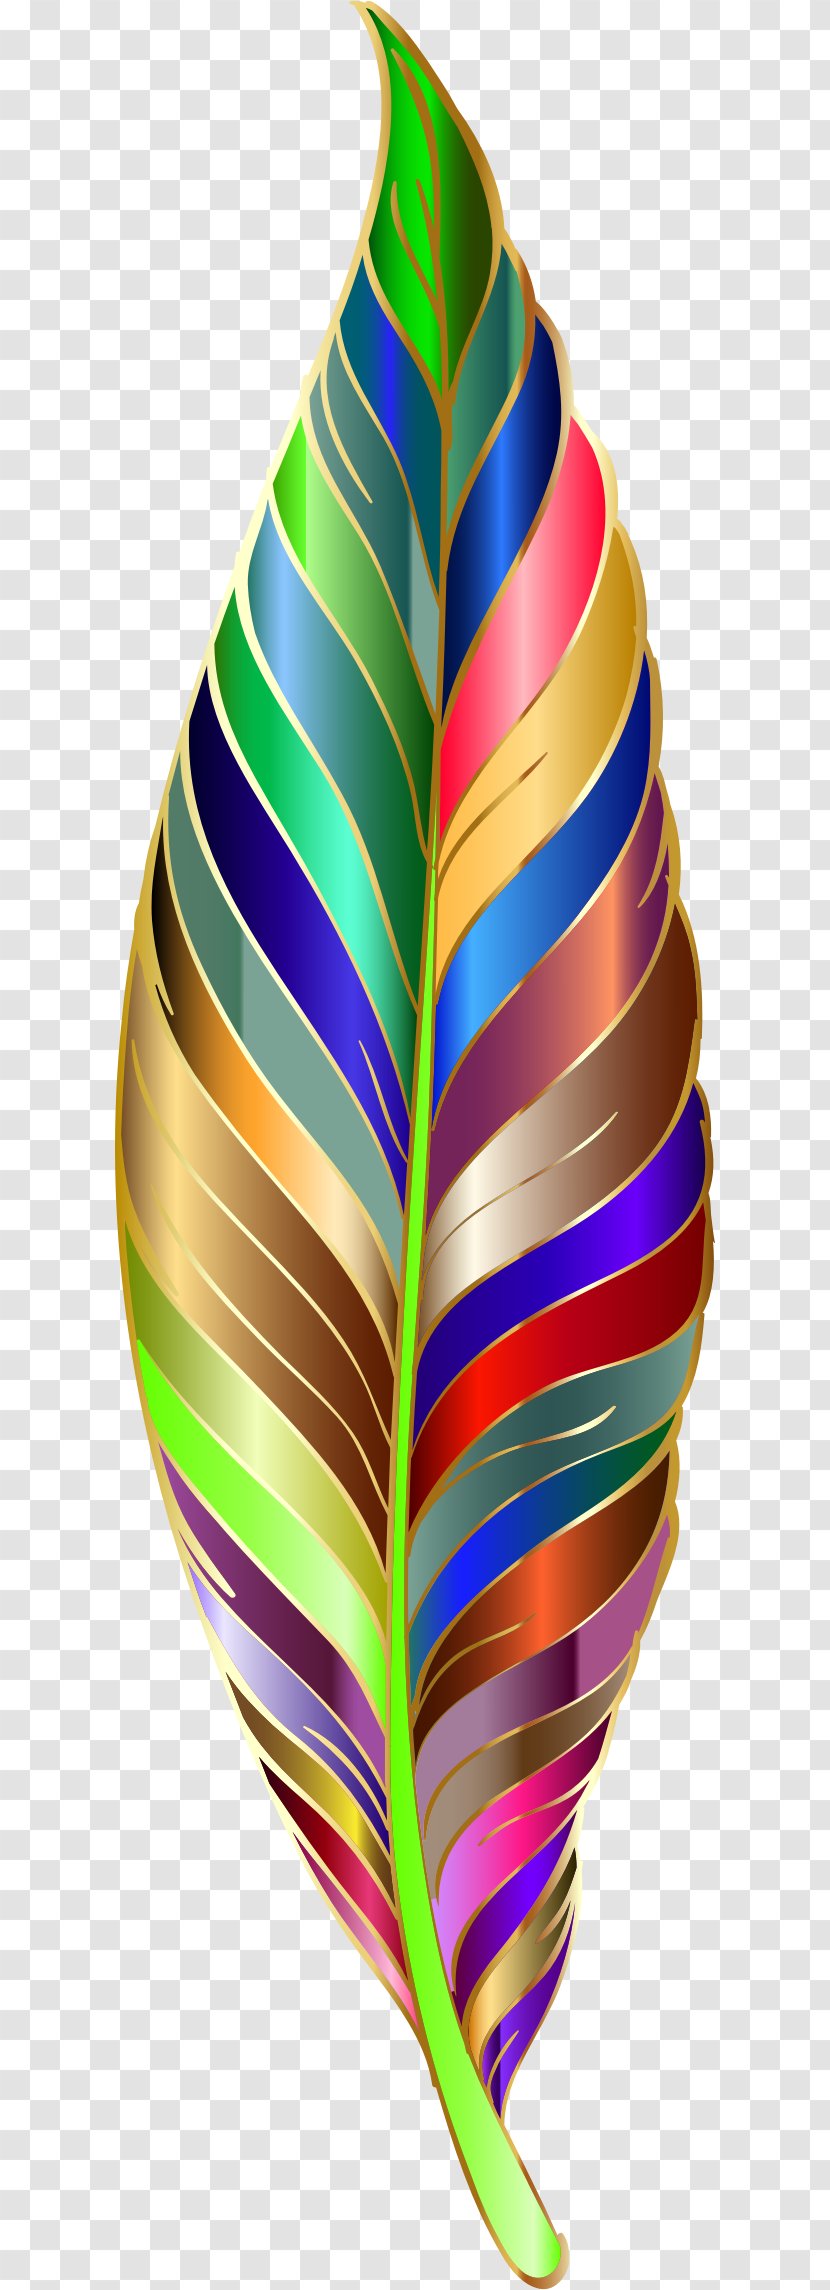 Clip Art - Feather - Feathers Transparent PNG